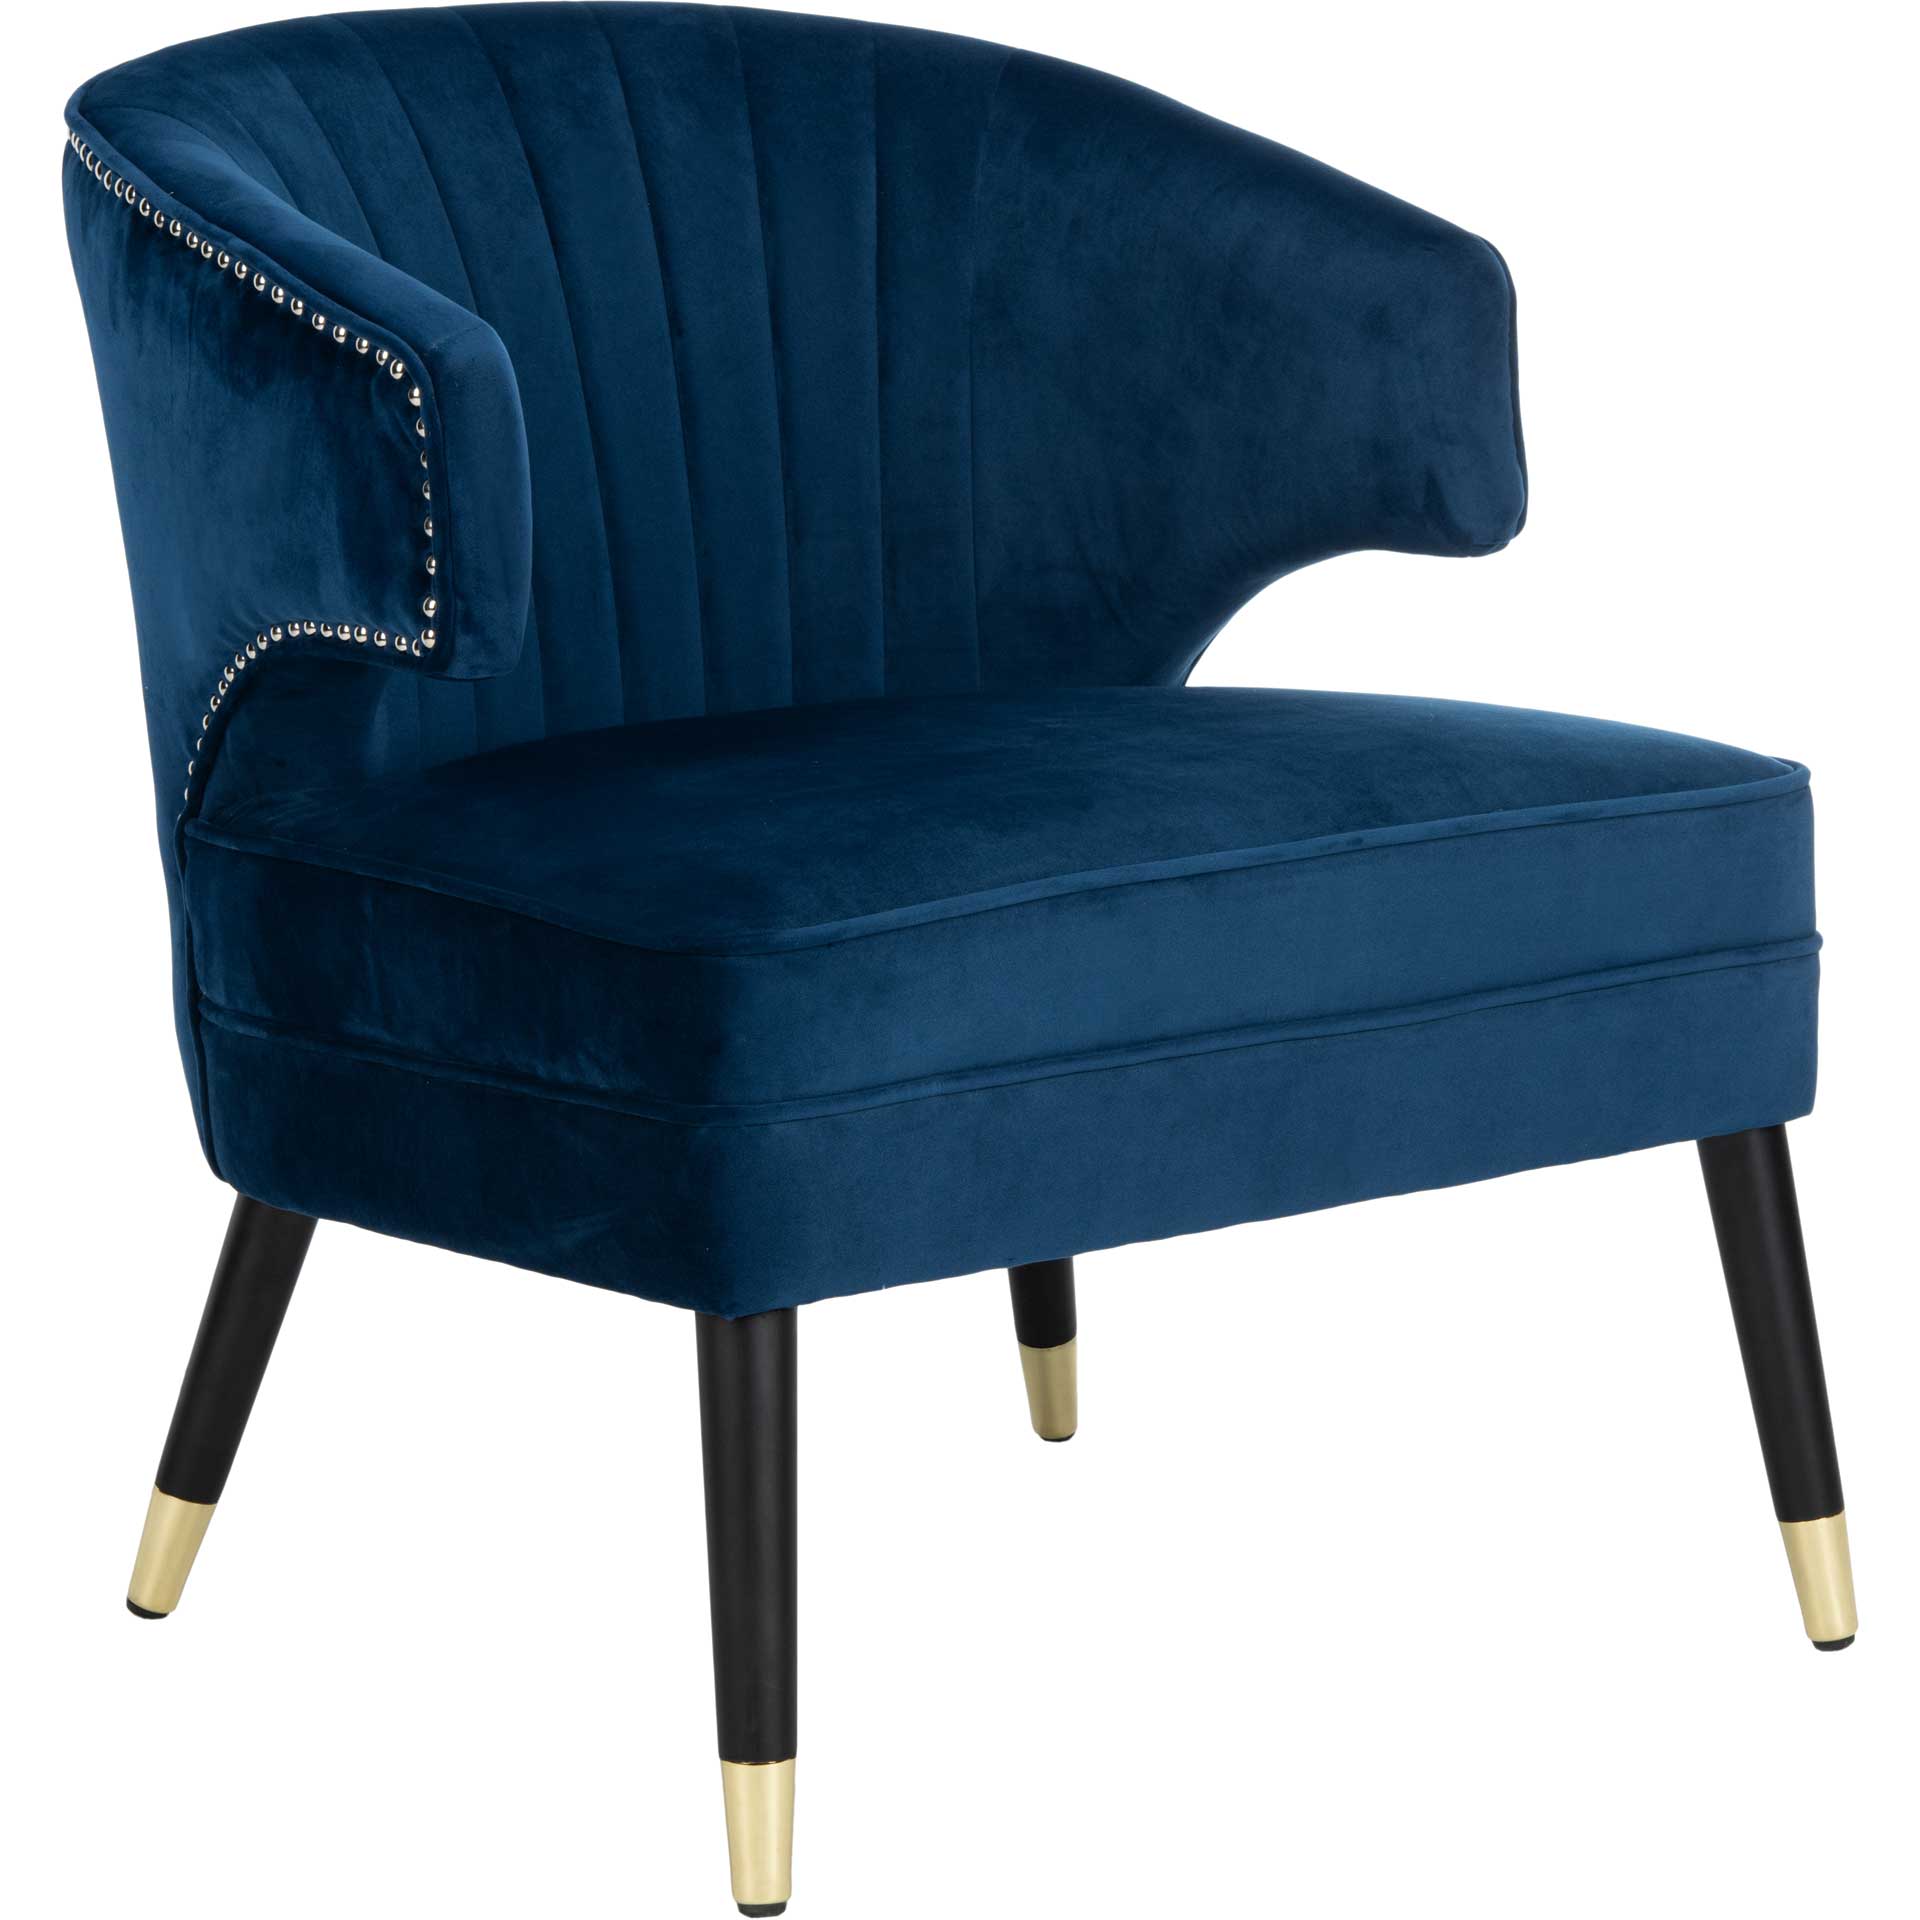 Stitch Wingback Accent Chair Navy/Black